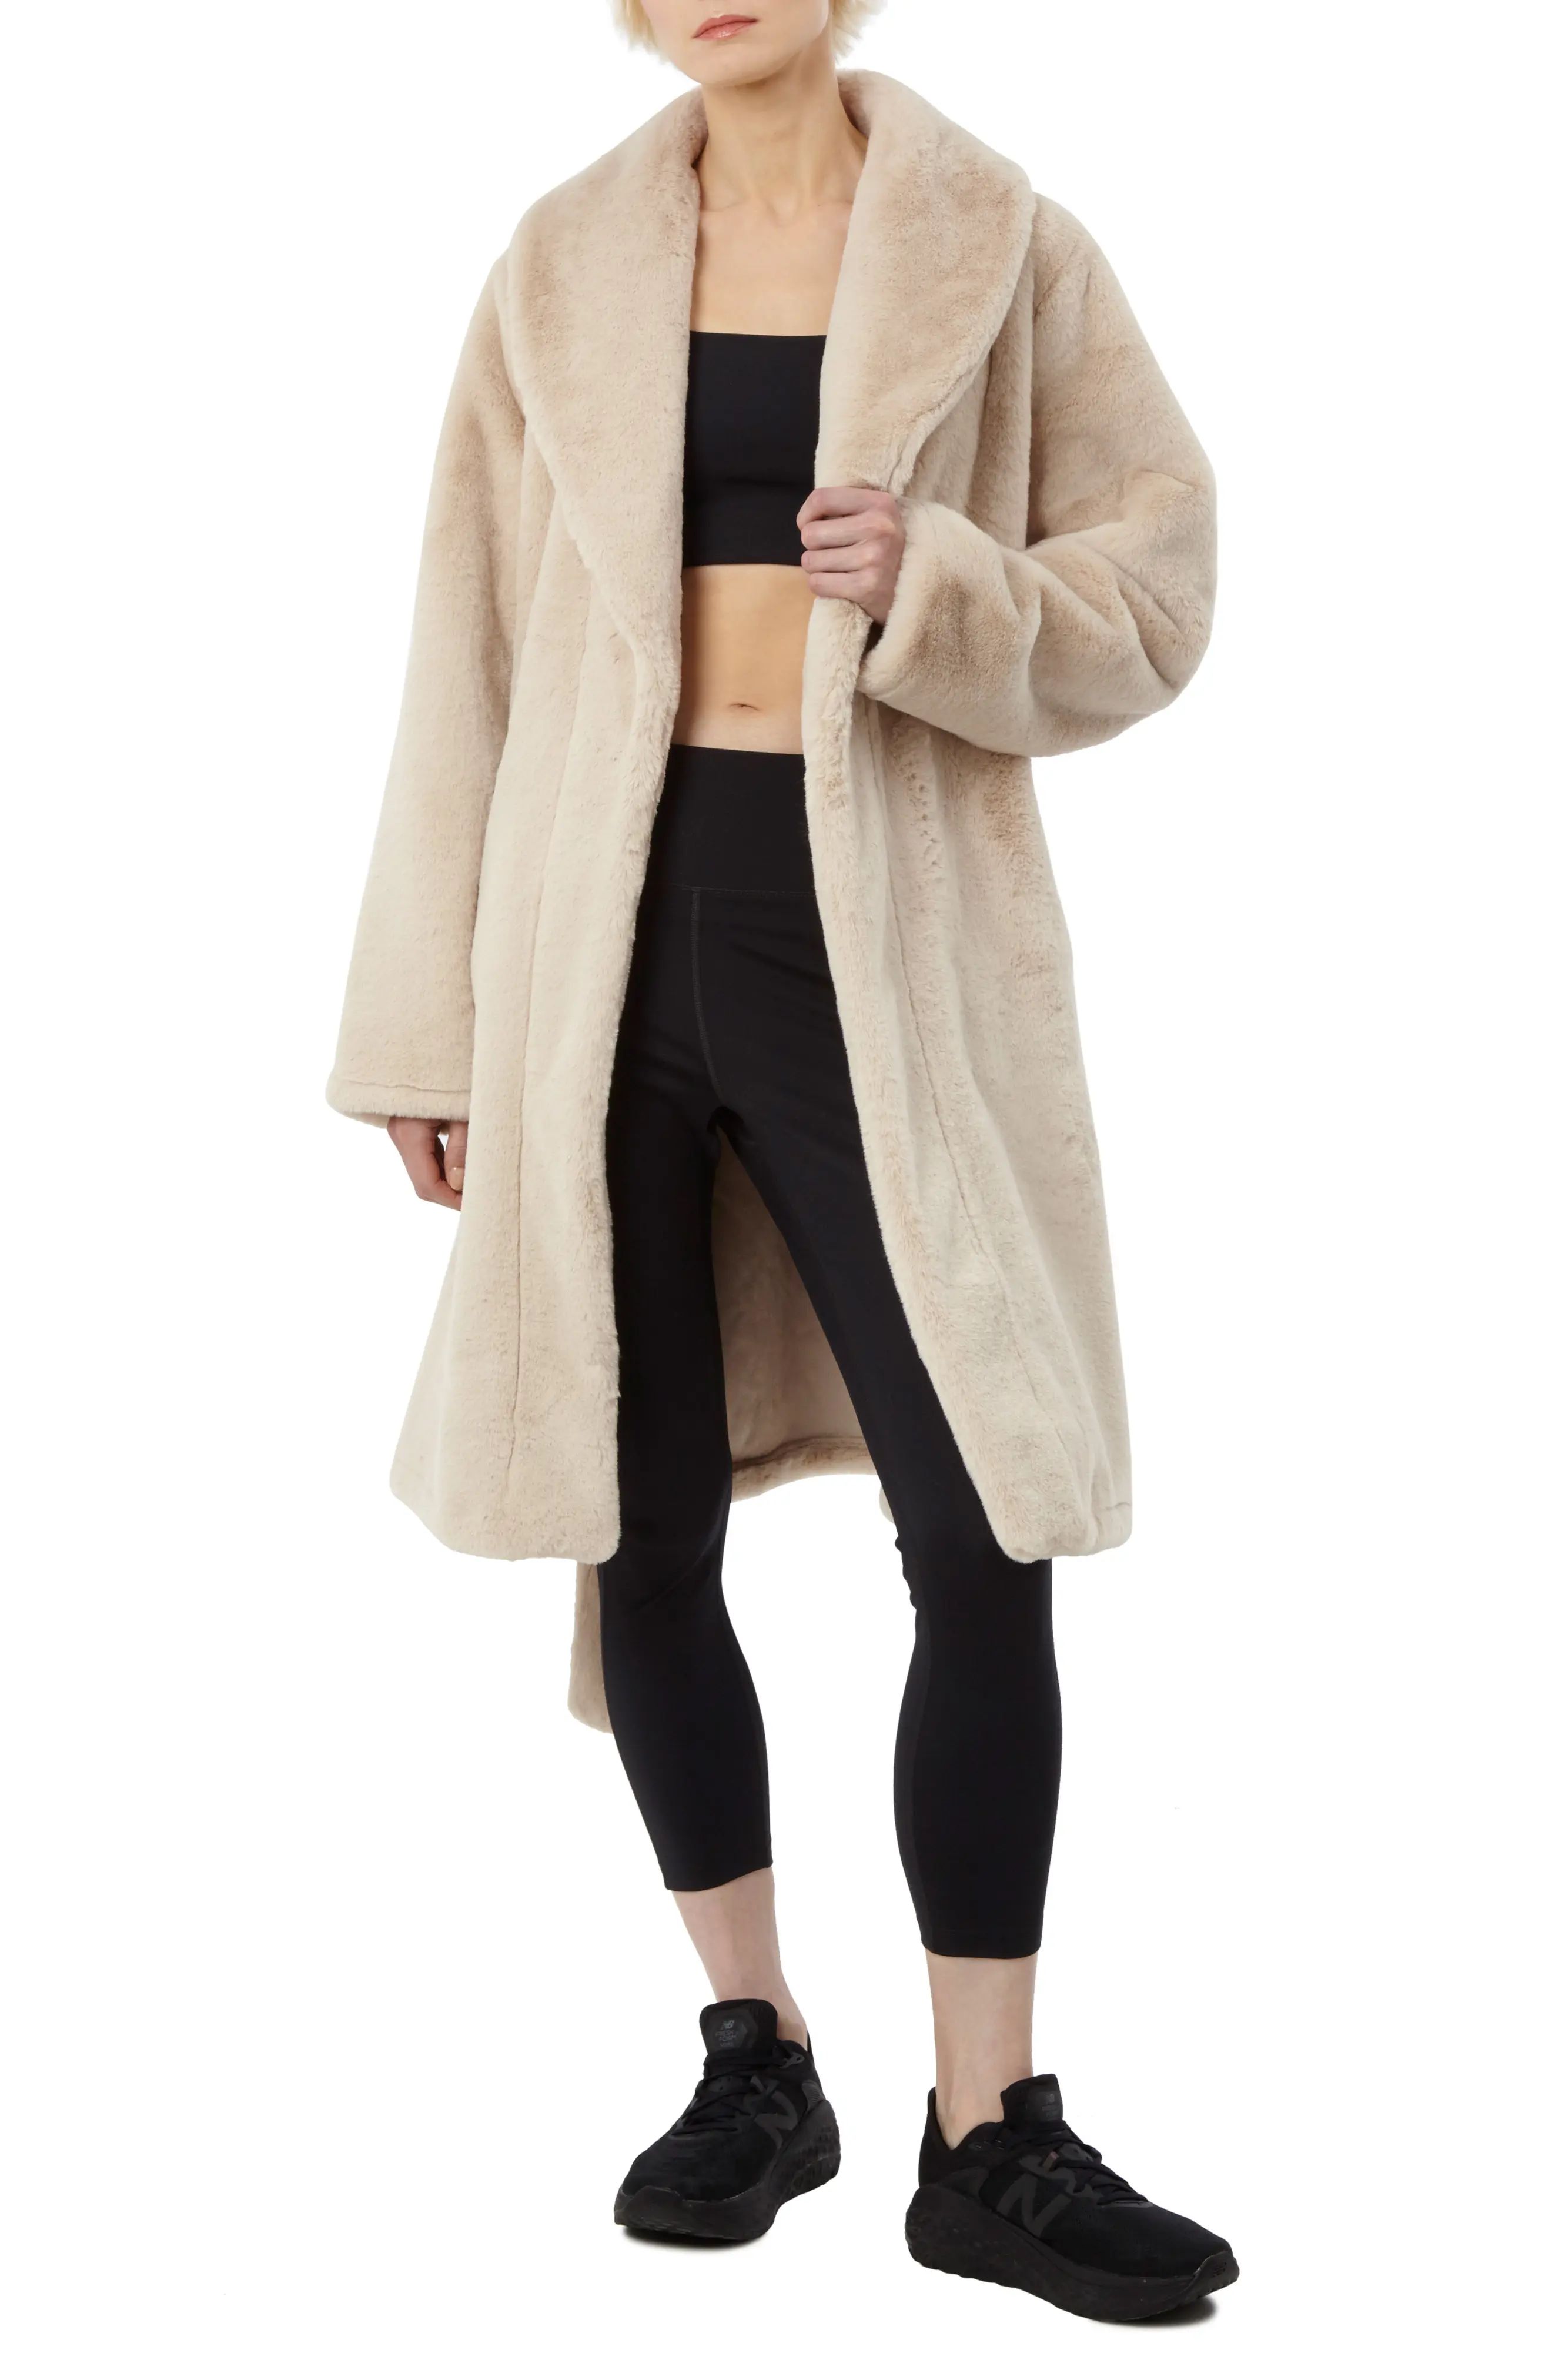 Apparis Women's Bree Faux Fur Coat in Latte at Nordstrom, Size Small | Nordstrom